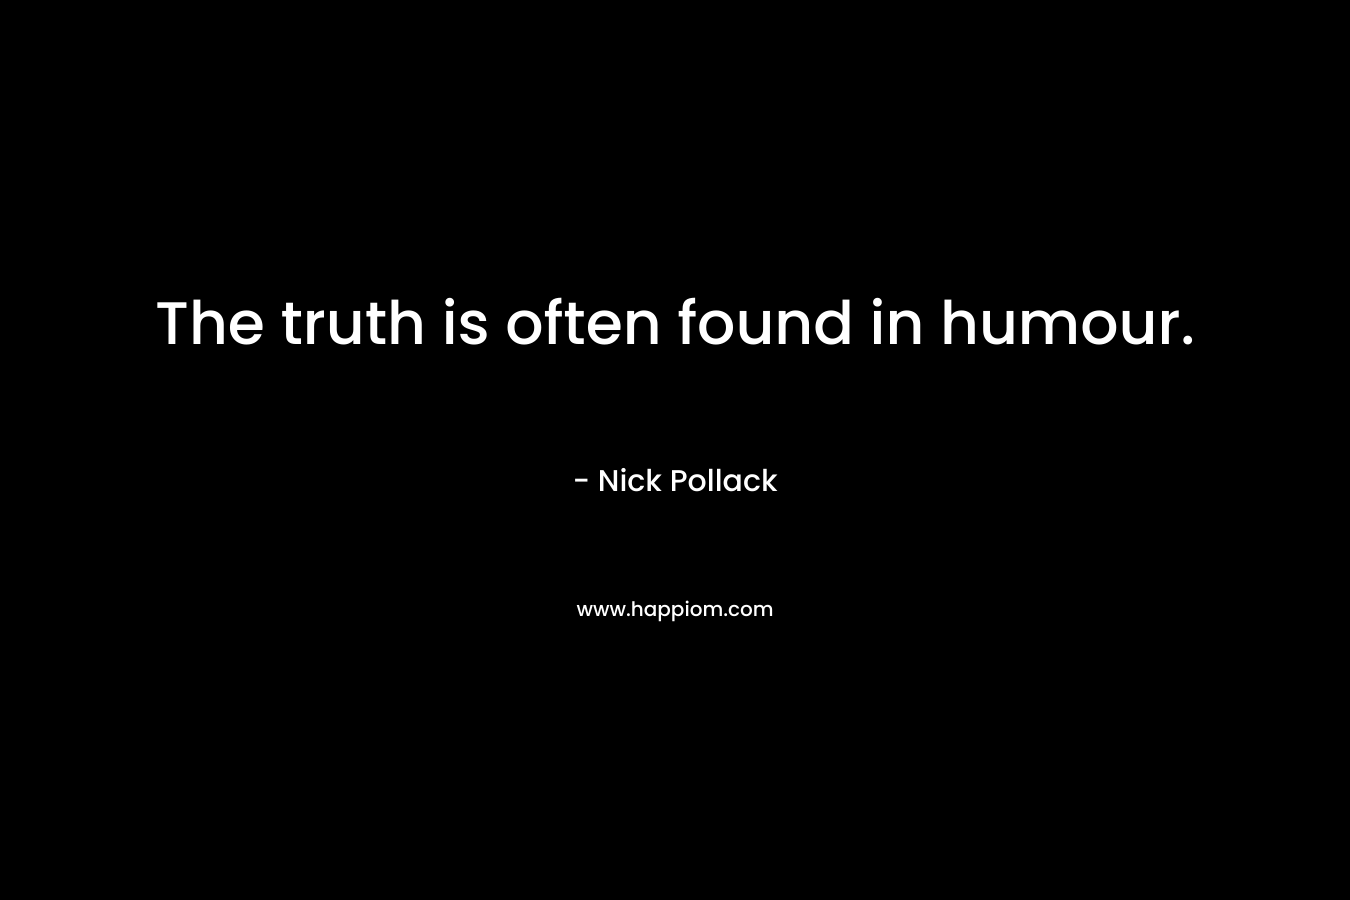 The truth is often found in humour. – Nick Pollack